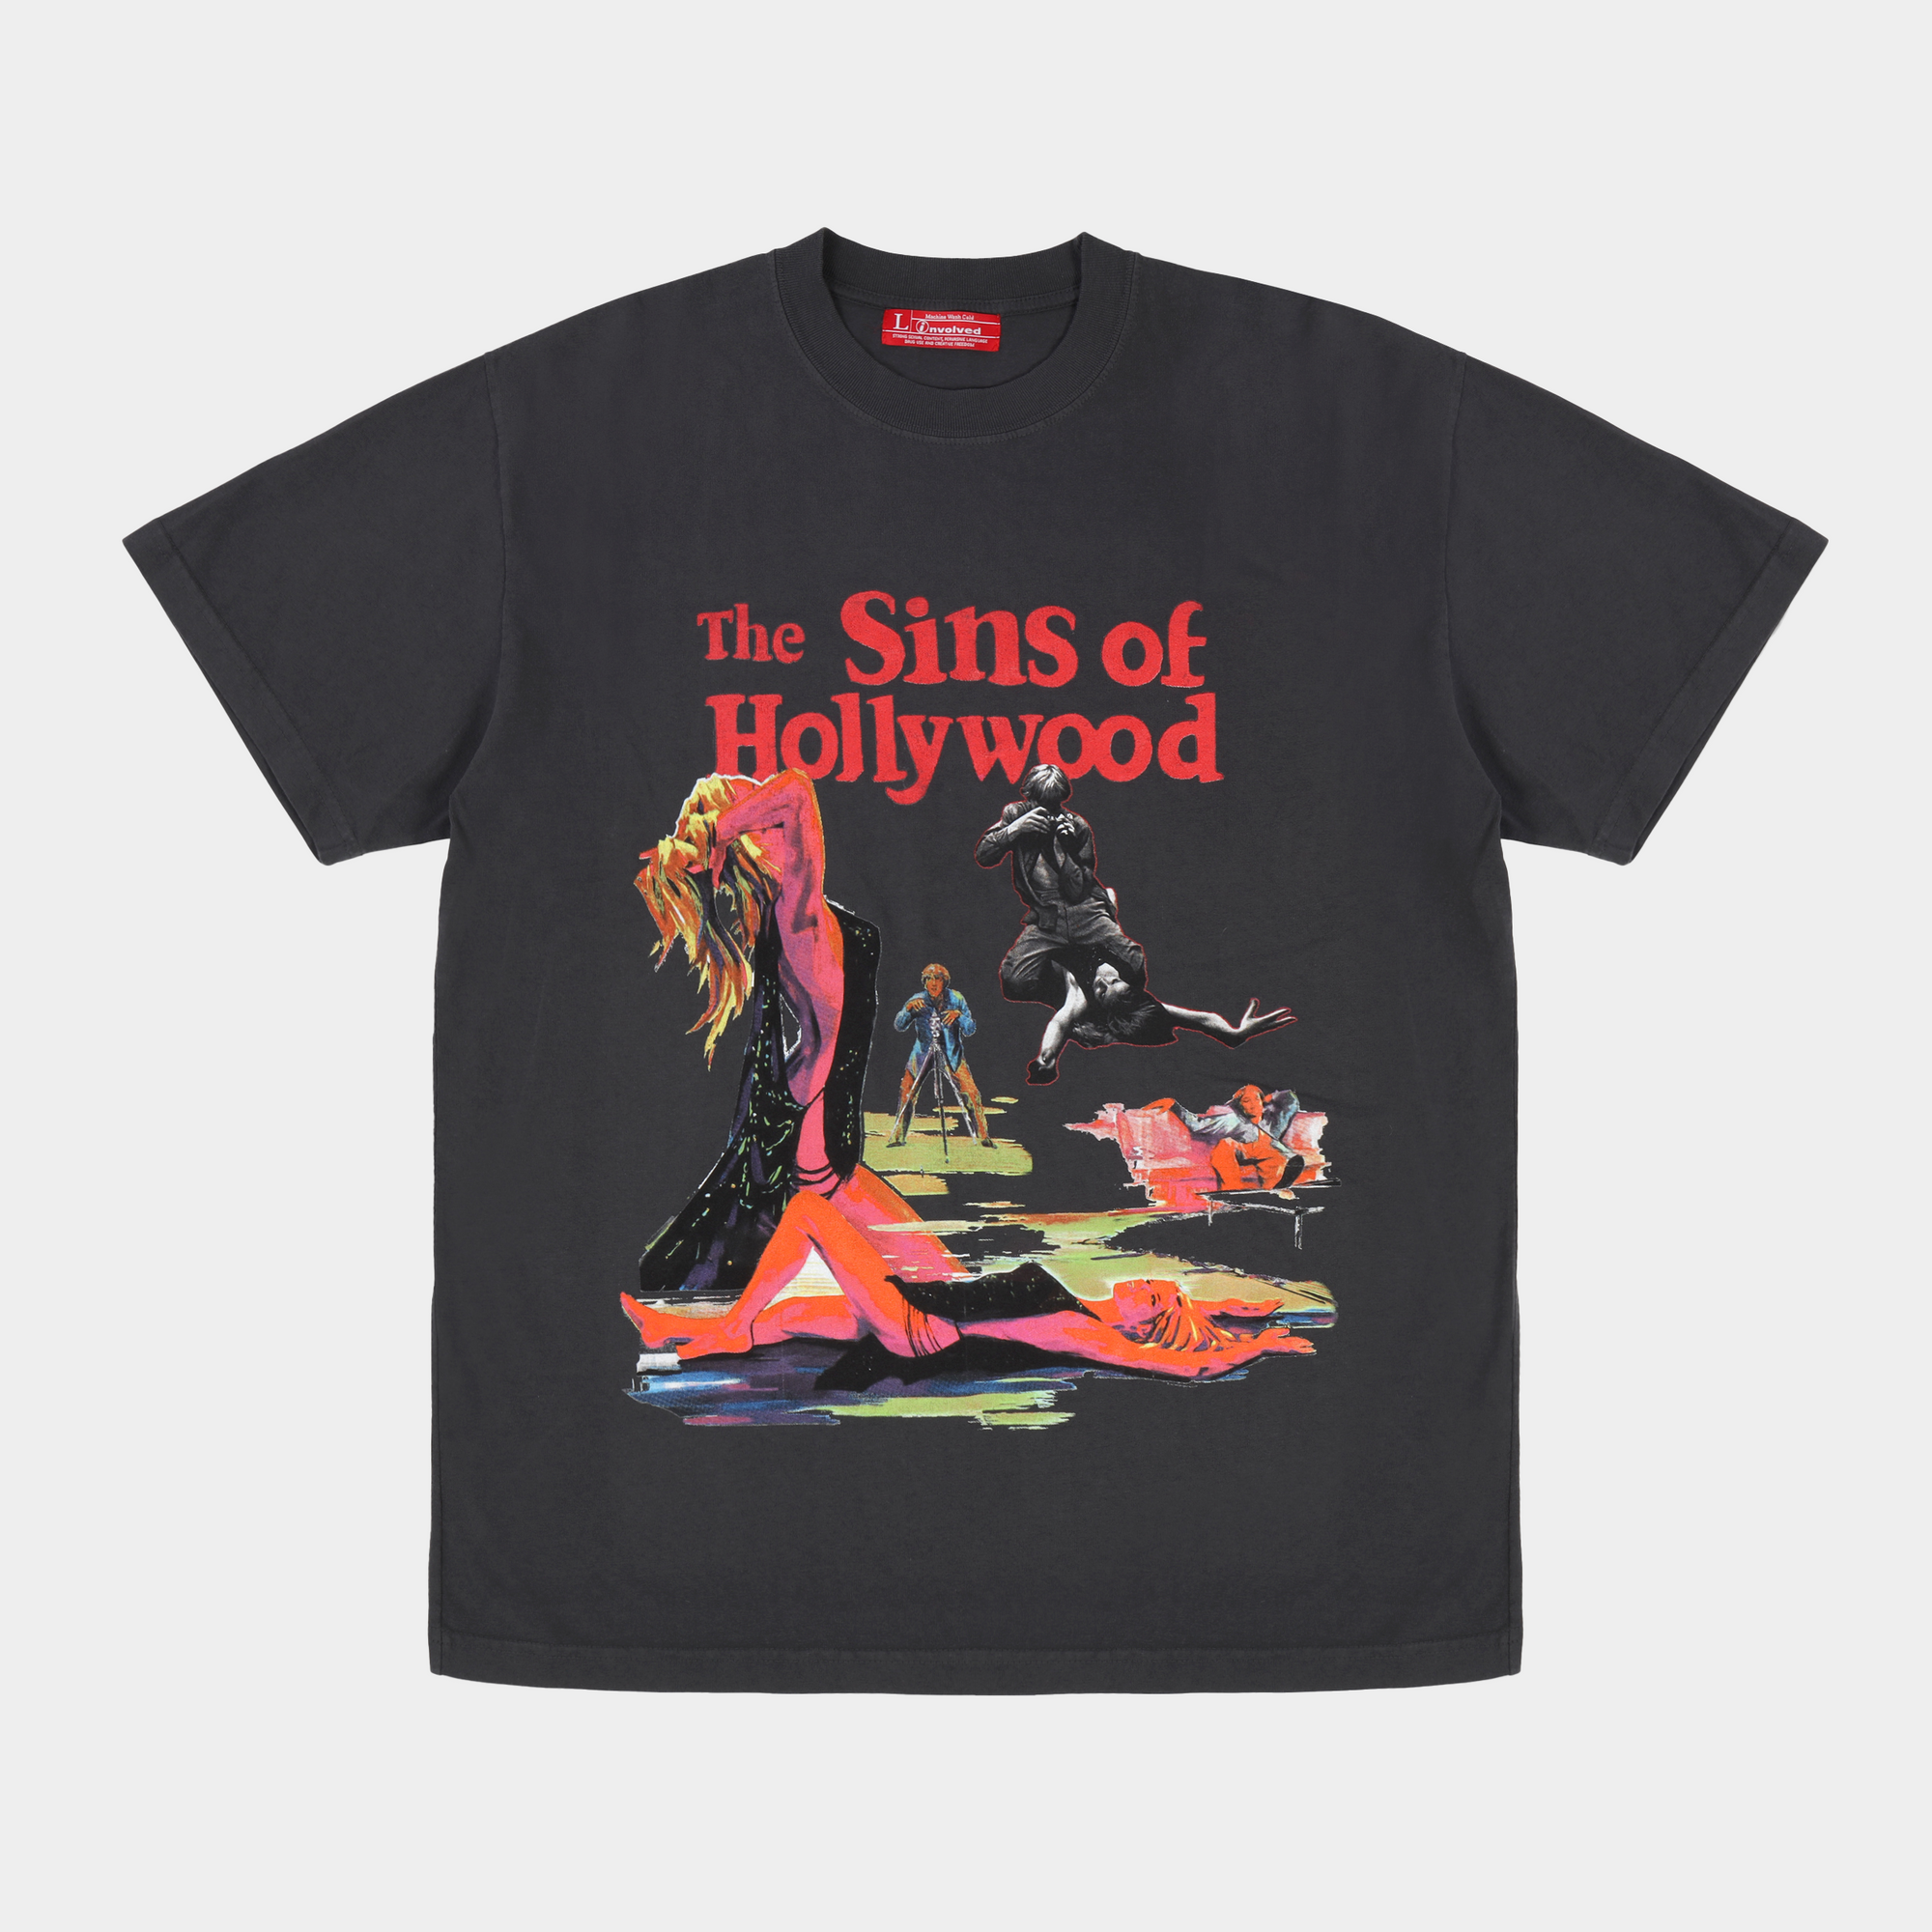 The Sins of Hollywood Tee